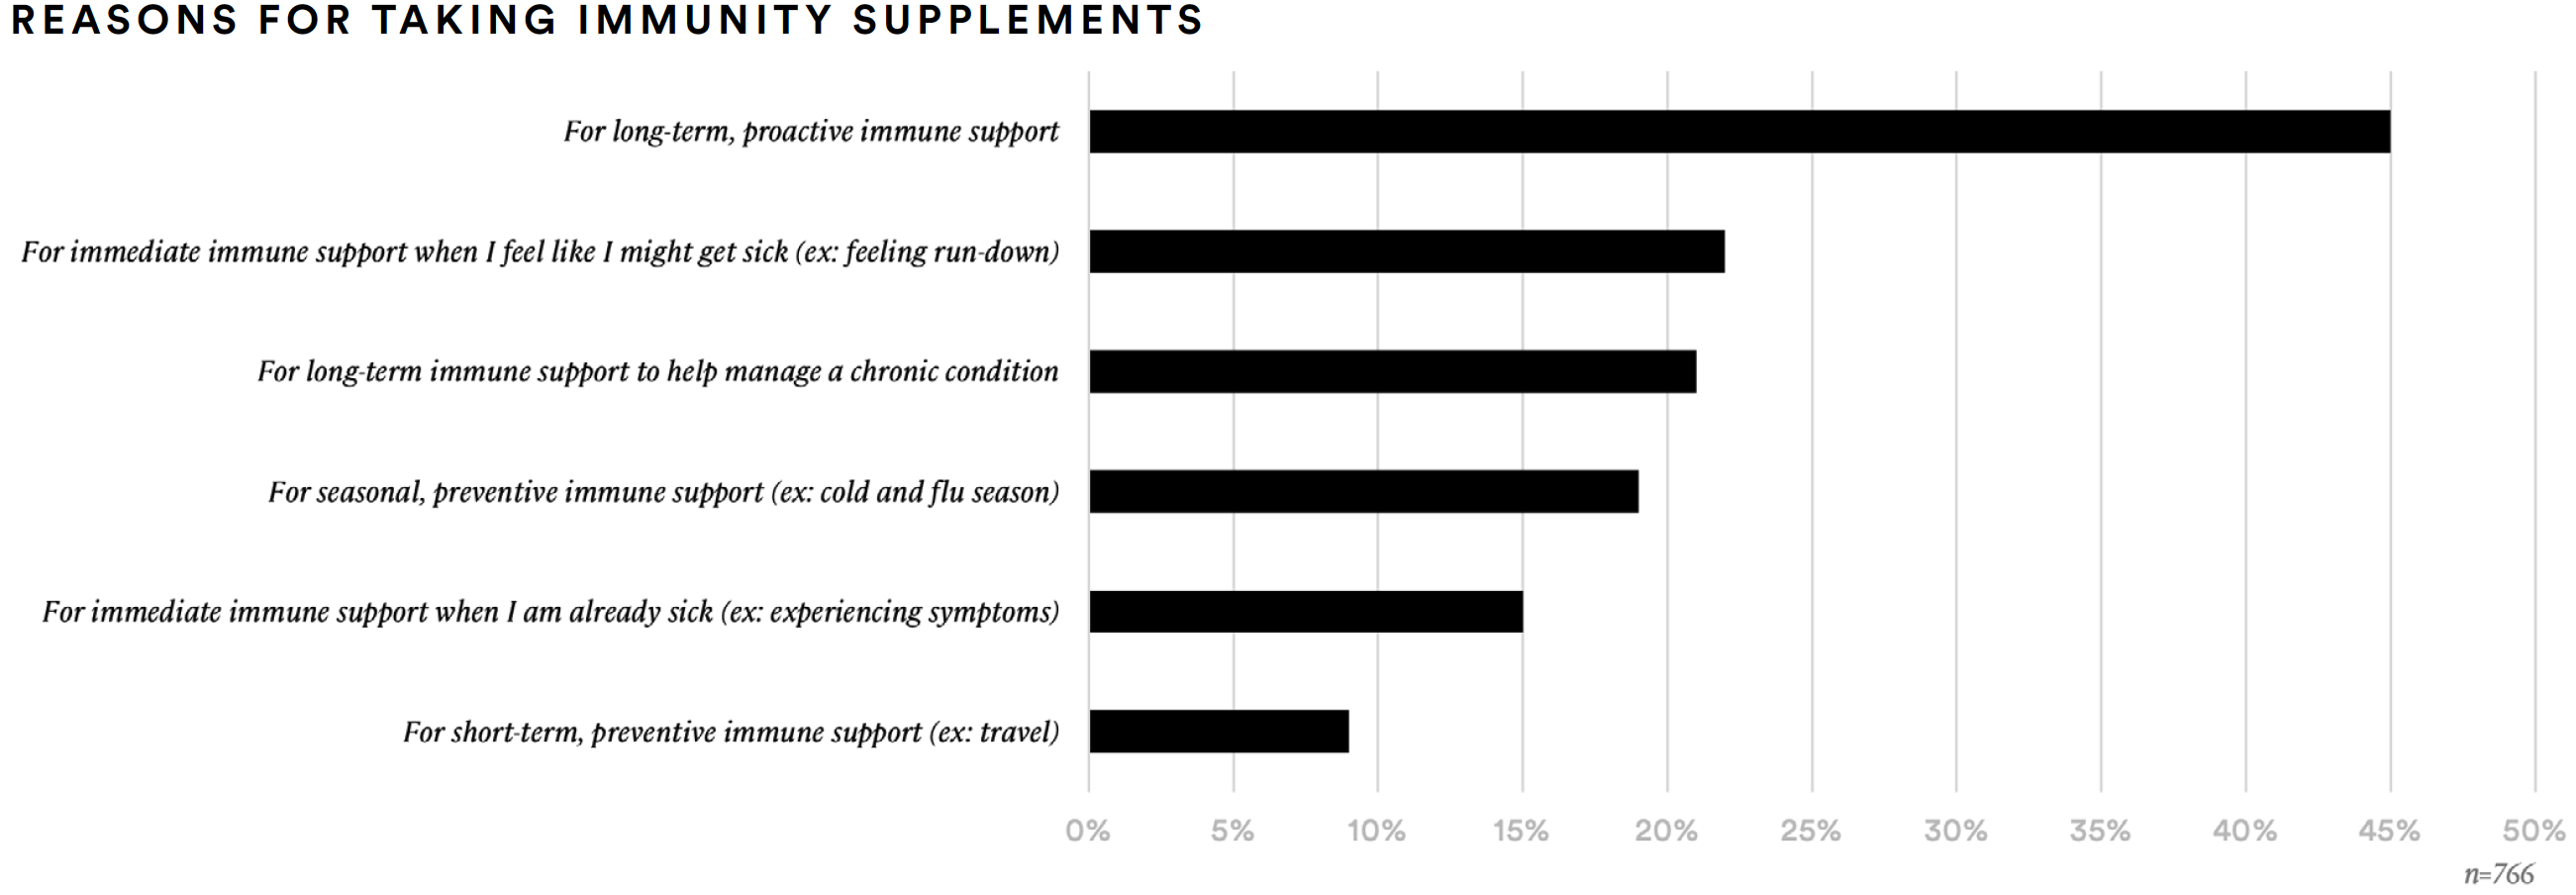 reasons for taking immunity supplements table